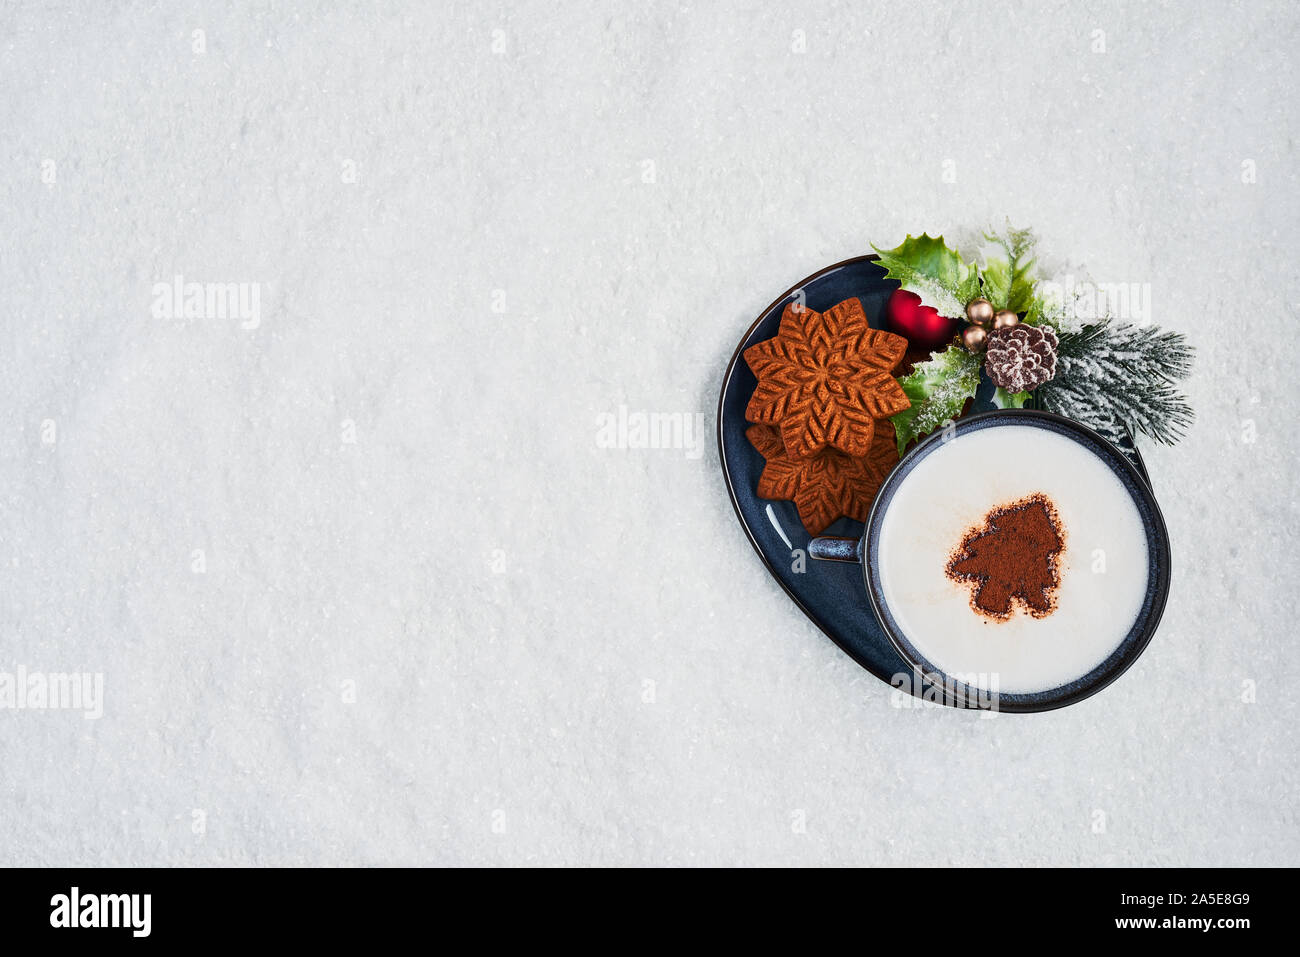 Gingerbread cookies with hot cocoa drink or cappuccino on snow. Top view of traditional Christmas gingerbread cookies with copy space. Stock Photo